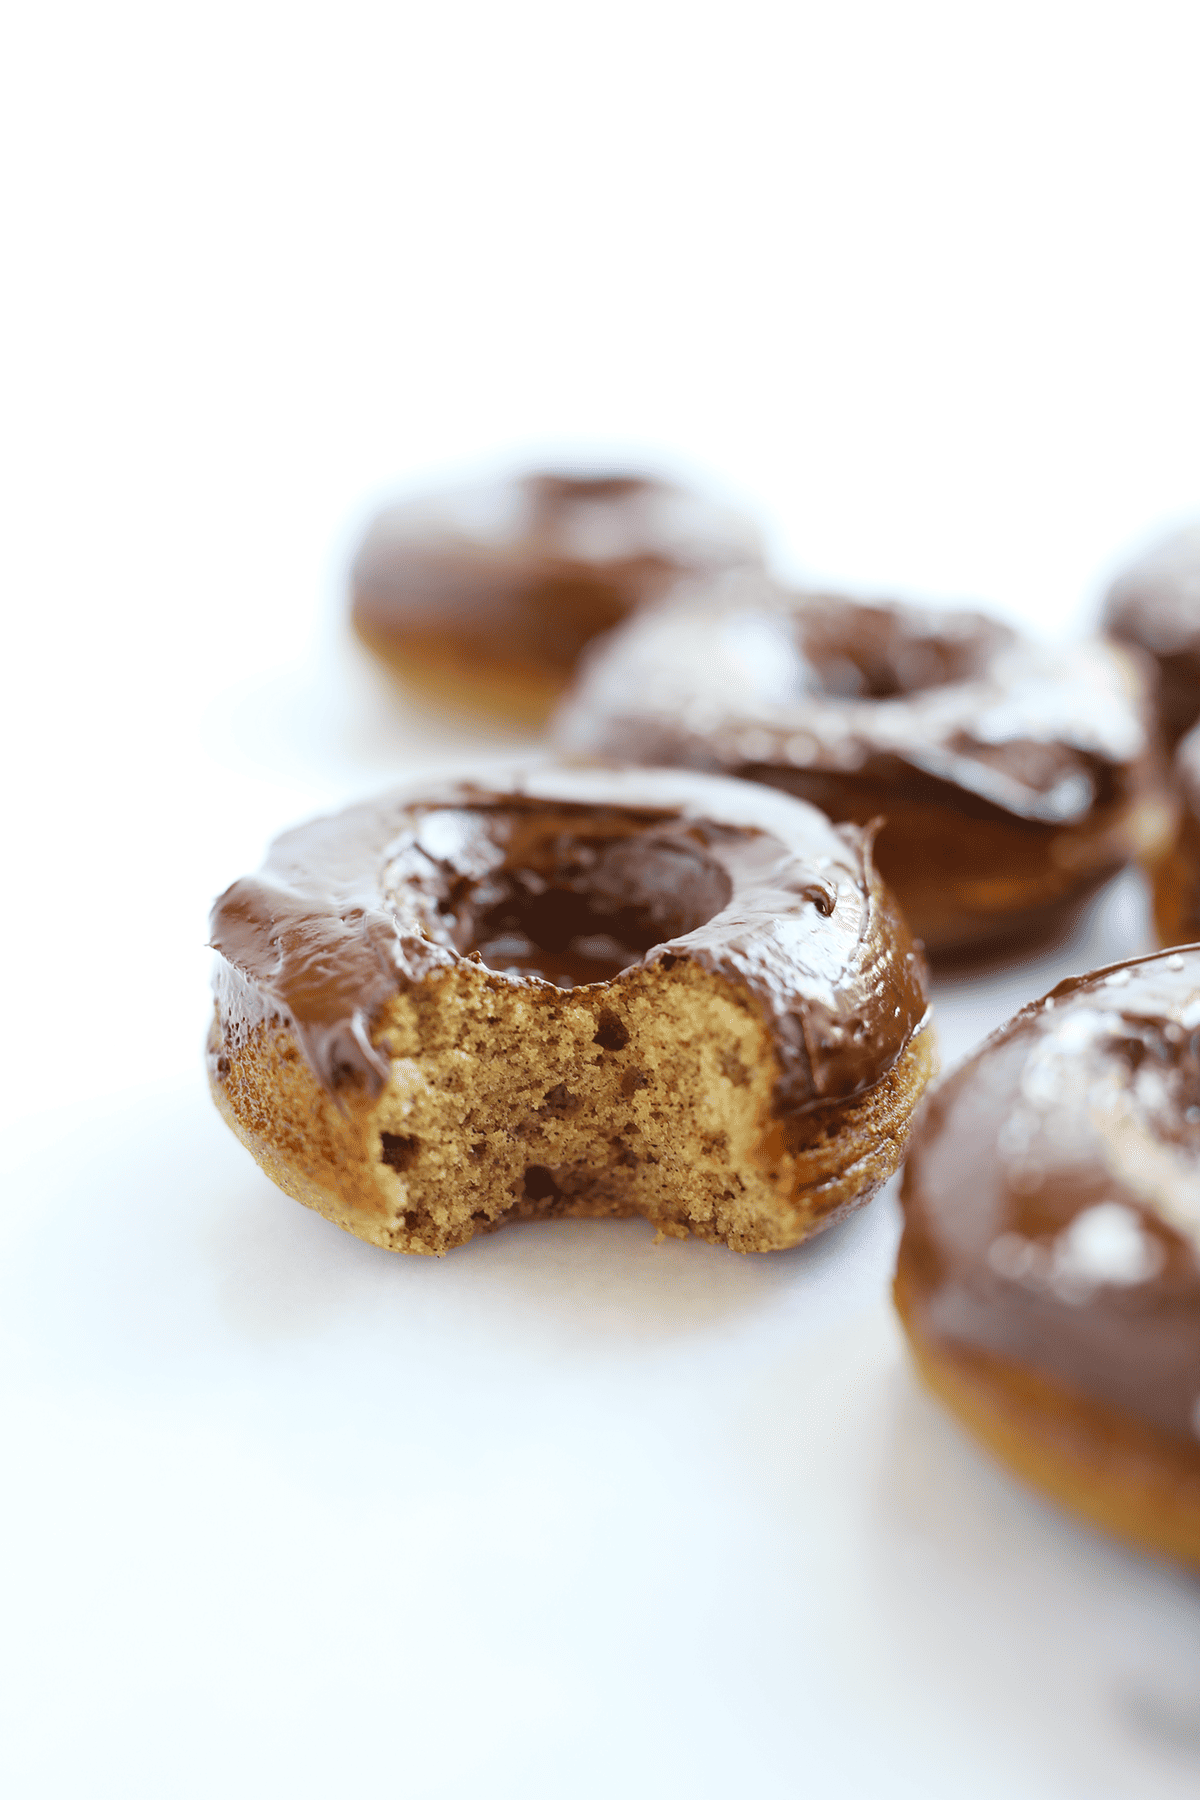 These Chocolate Frosted Cinnamon Donuts are super light and moist in the center with a rich chocolate frosted top, only require 1 bowl and vegan or course!